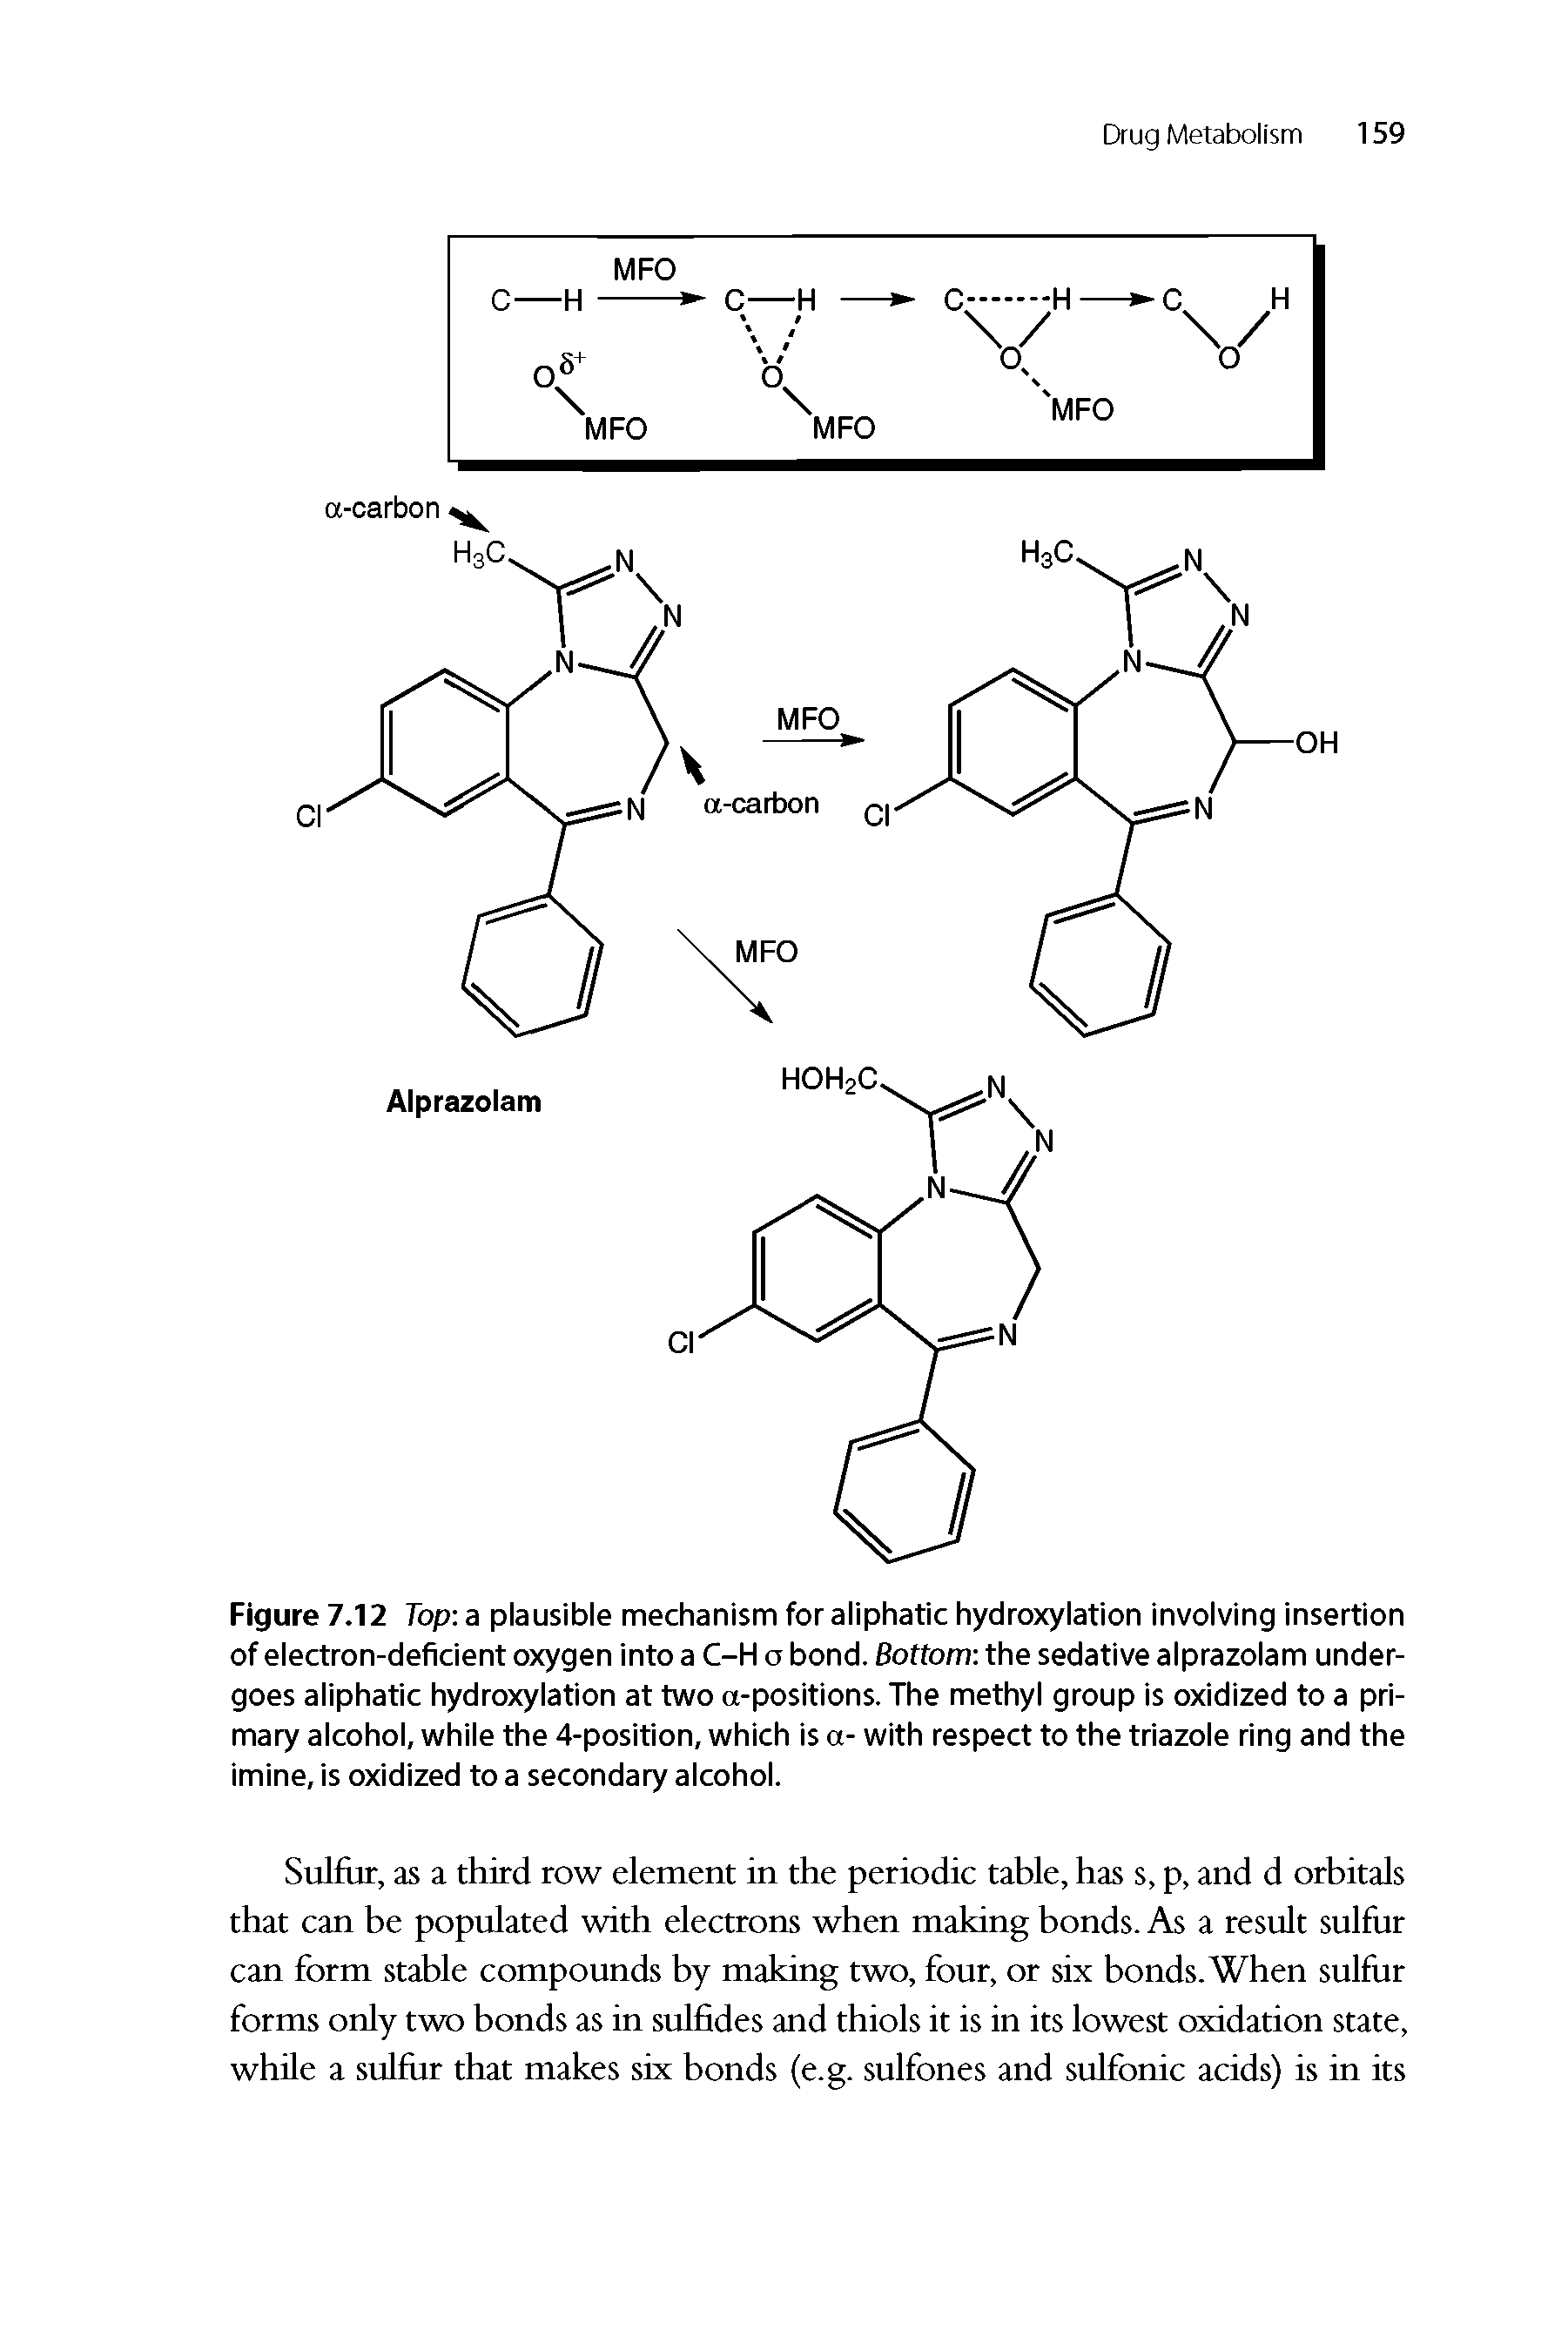 Figure 7.12 Top a plausible mechanism for aliphatic hydroxylation involving insertion of electron-deficient oxygen into a C-H o bond. Bottom the sedative alprazolam undergoes aliphatic hydroxylation at two a-positions. The methyl group is oxidized to a primary alcohol, while the 4-position, which is a- with respect to the triazole ring and the imine, is oxidized to a secondary alcohol.